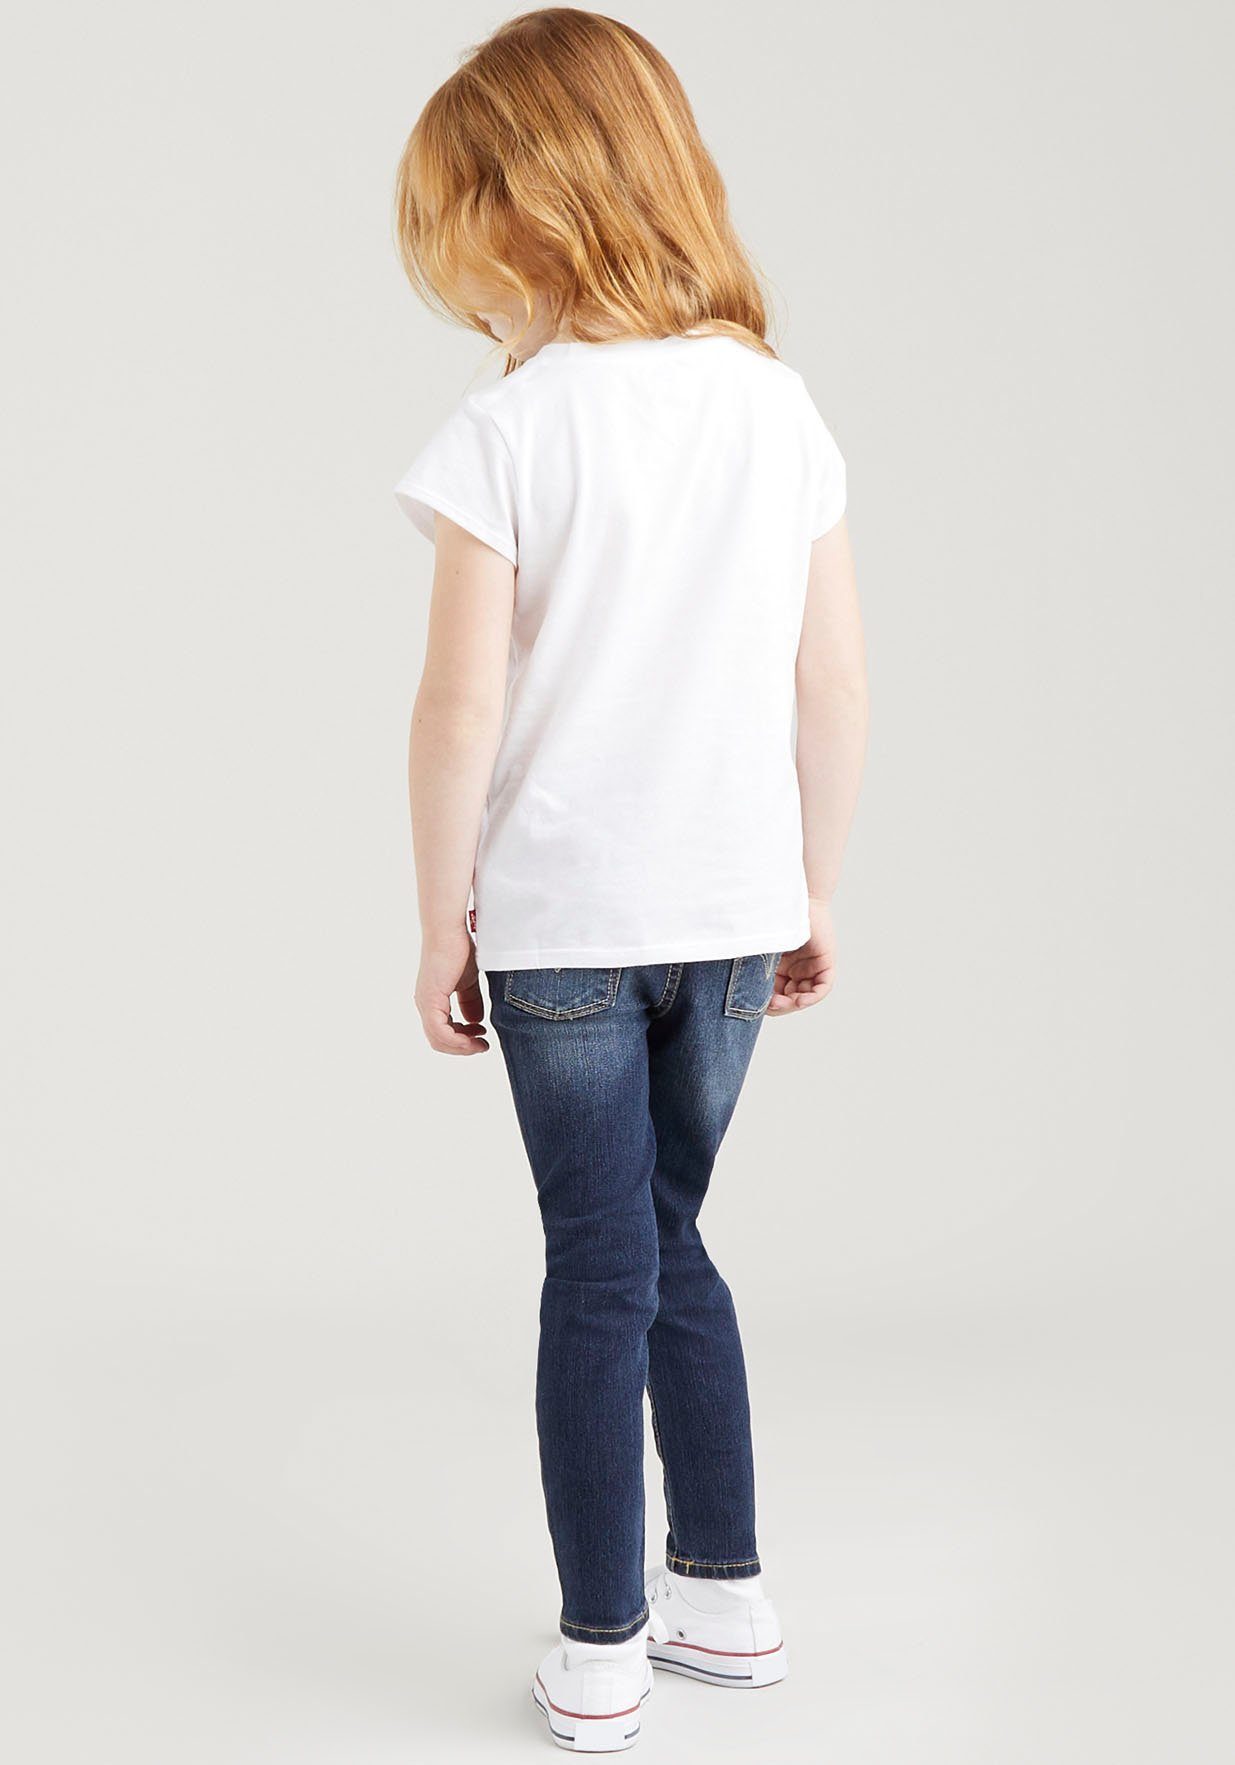 GIRLS Levi's® Kids weiß for T-Shirt TEE BATWING S/S